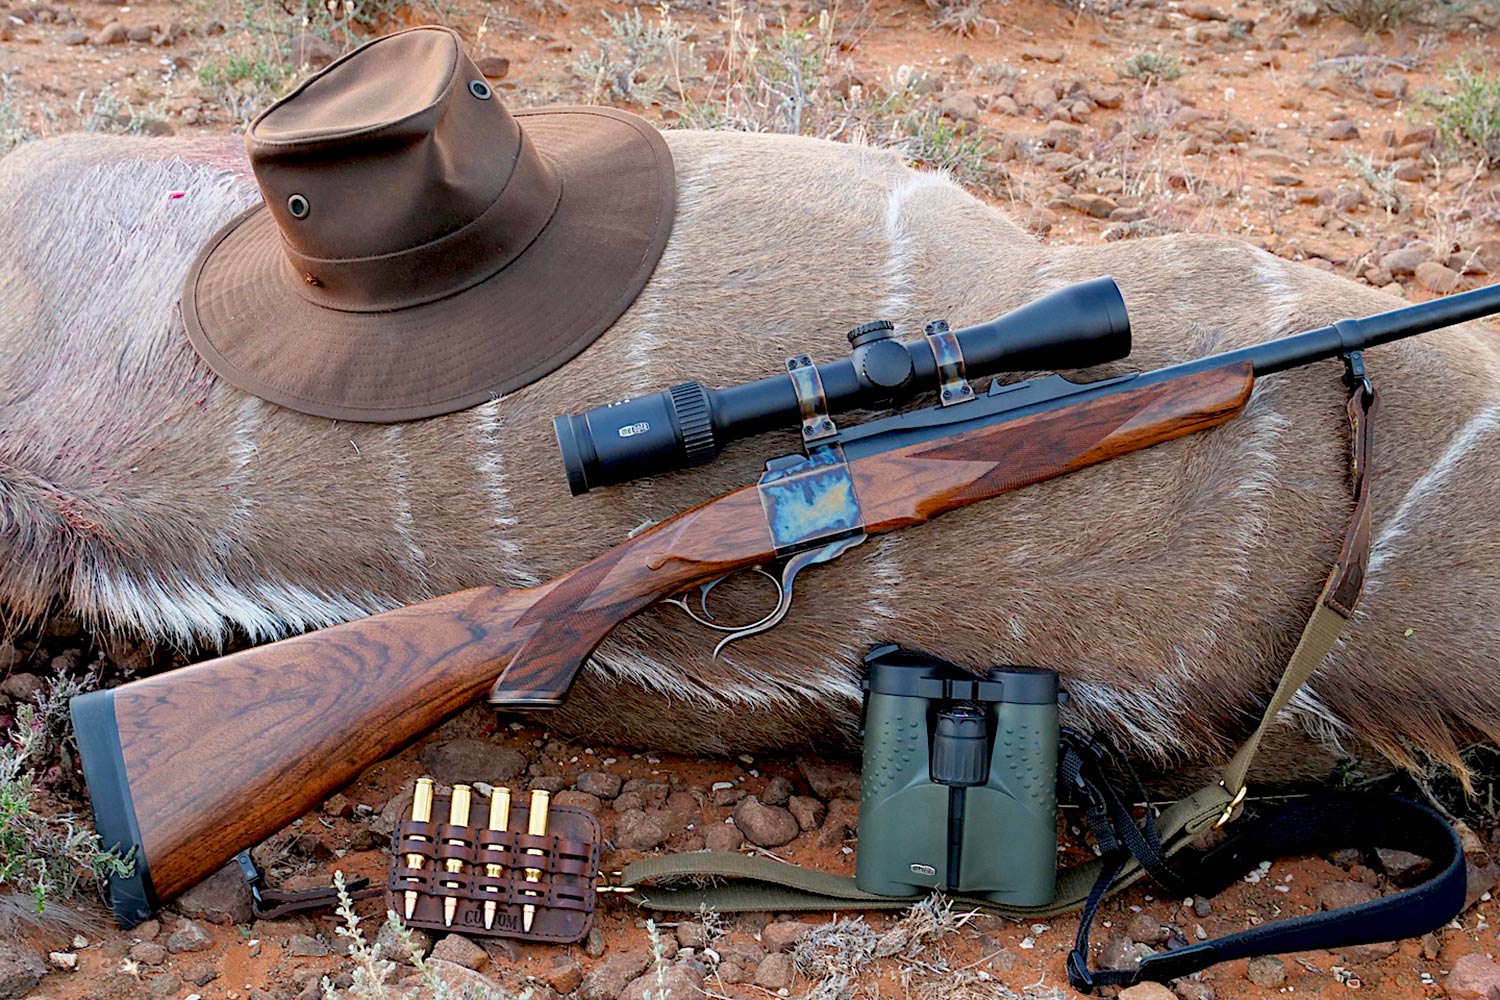 Backcountry hunting gear and rifles